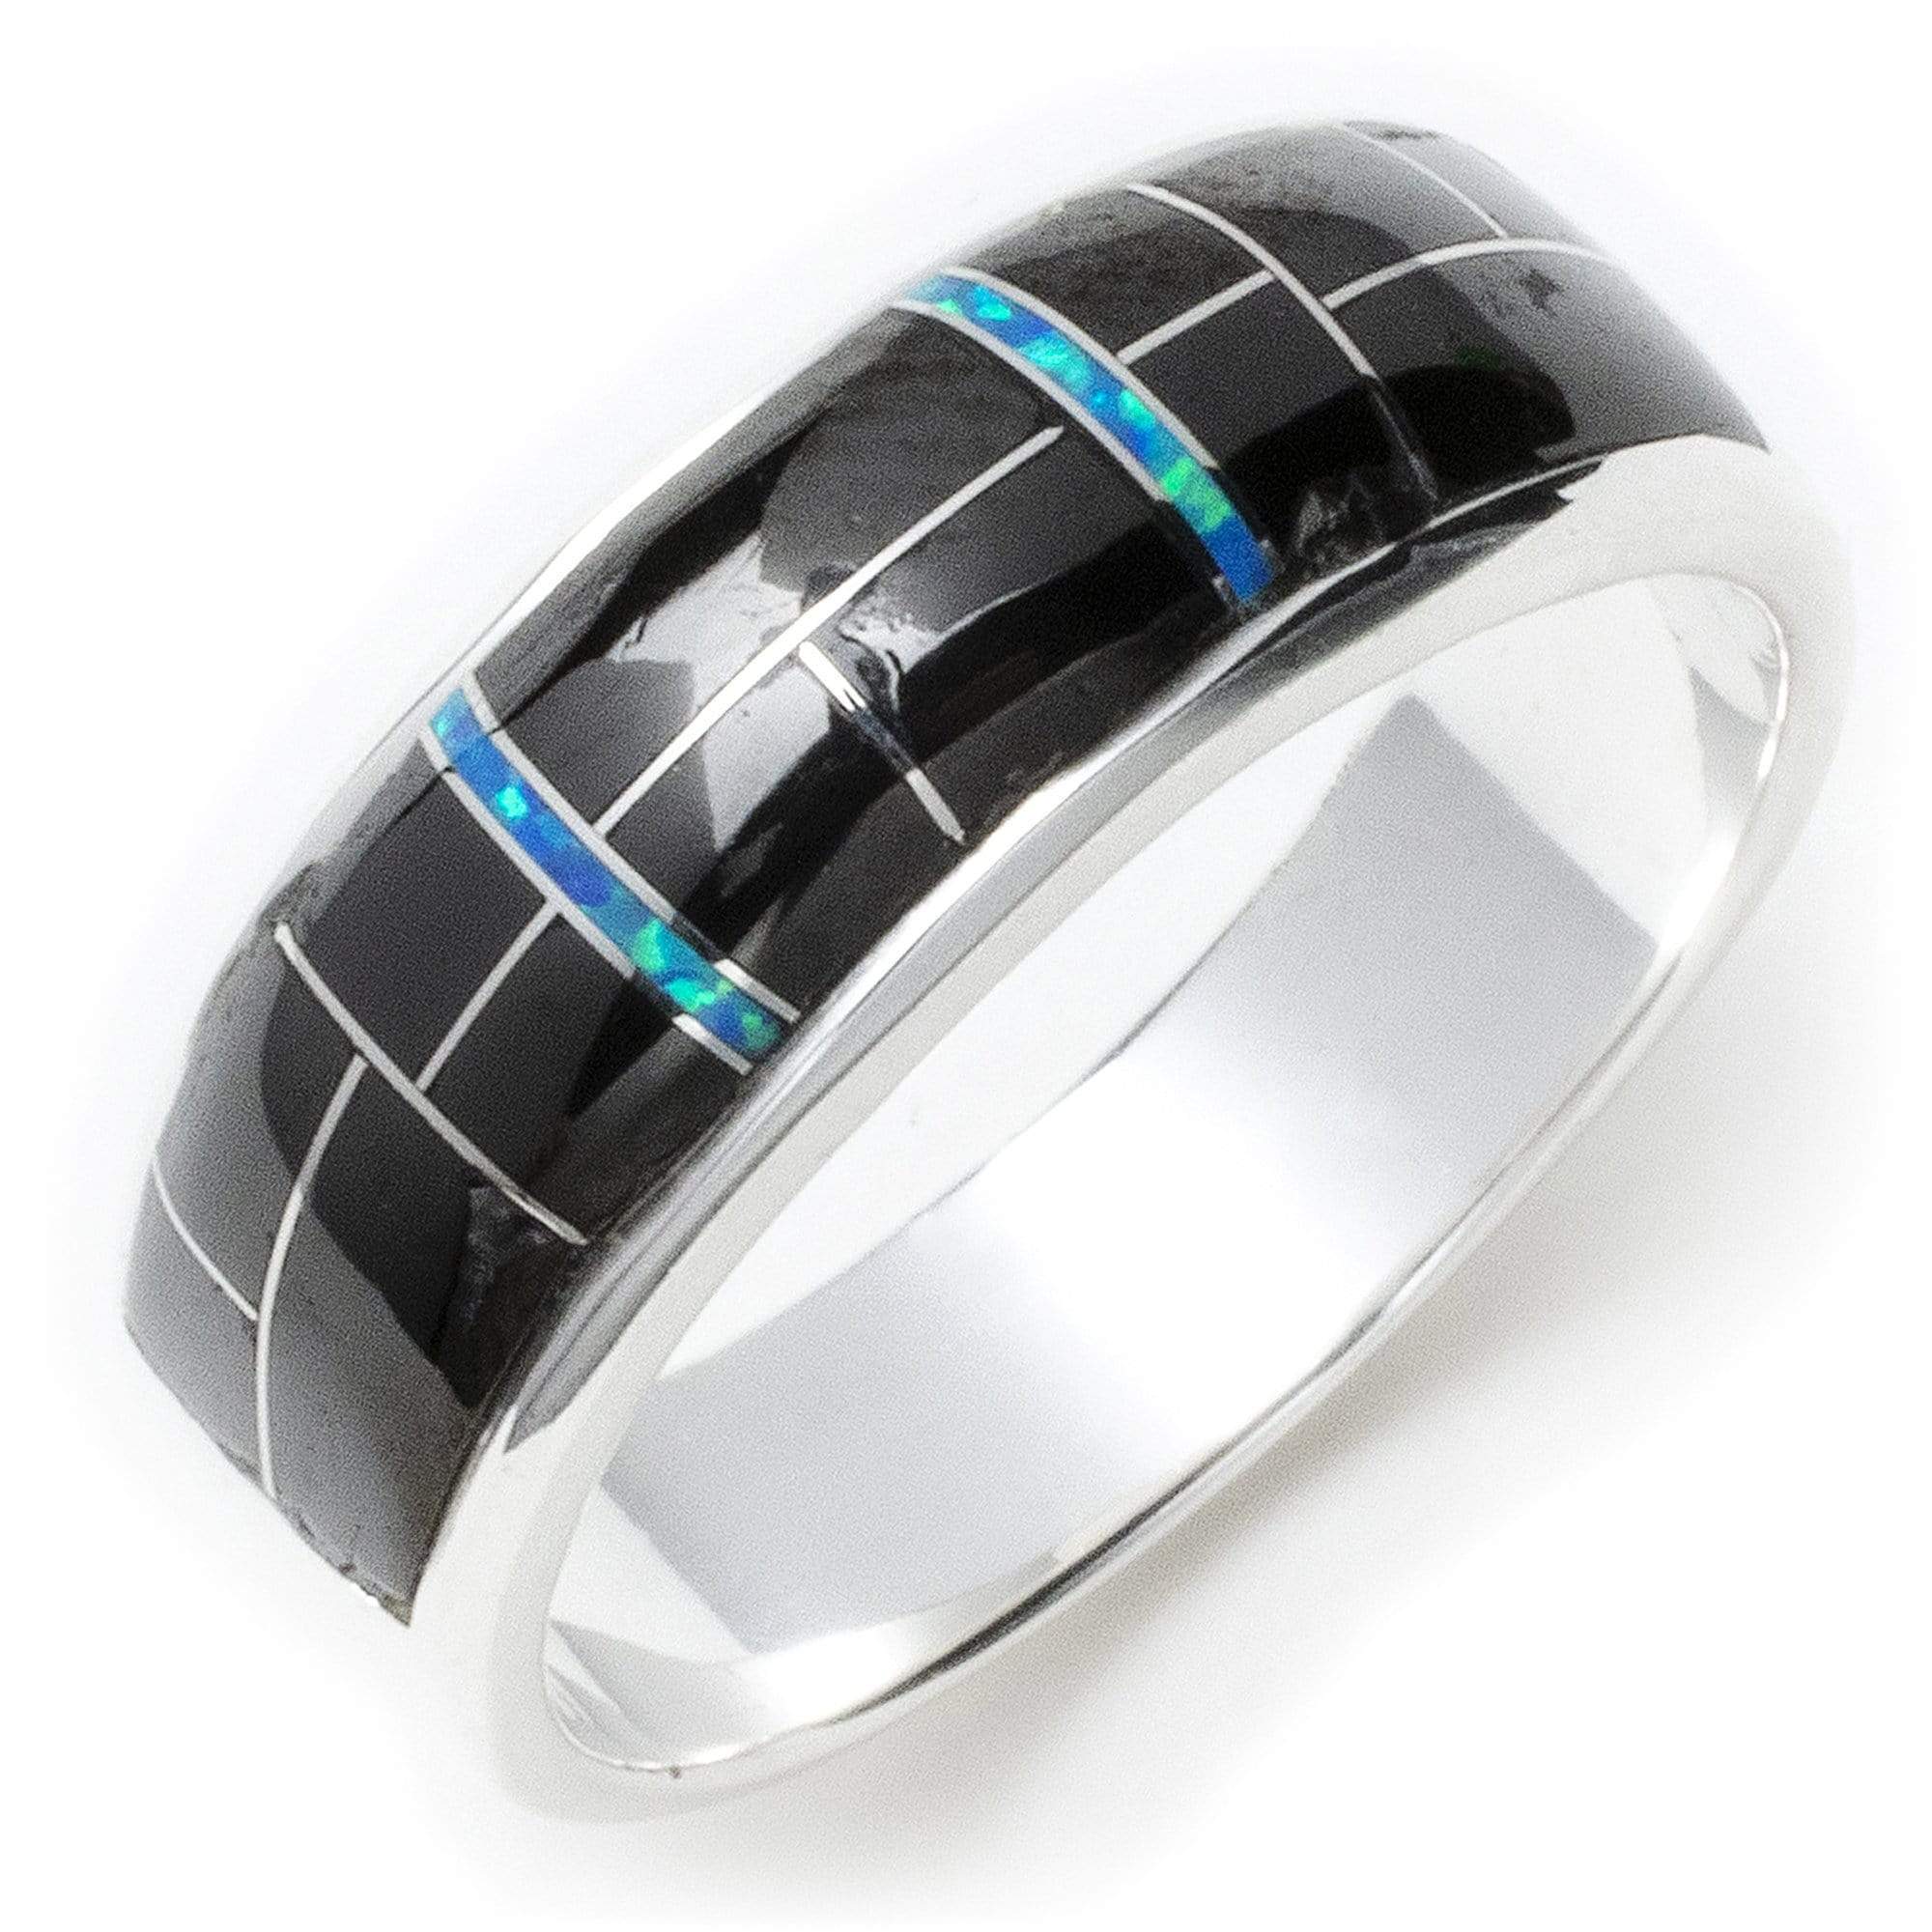 Kalifano Southwest Silver Jewelry Black Onyx 925 Sterling Silver Ring USA Handmade with Labratory Opal Accent